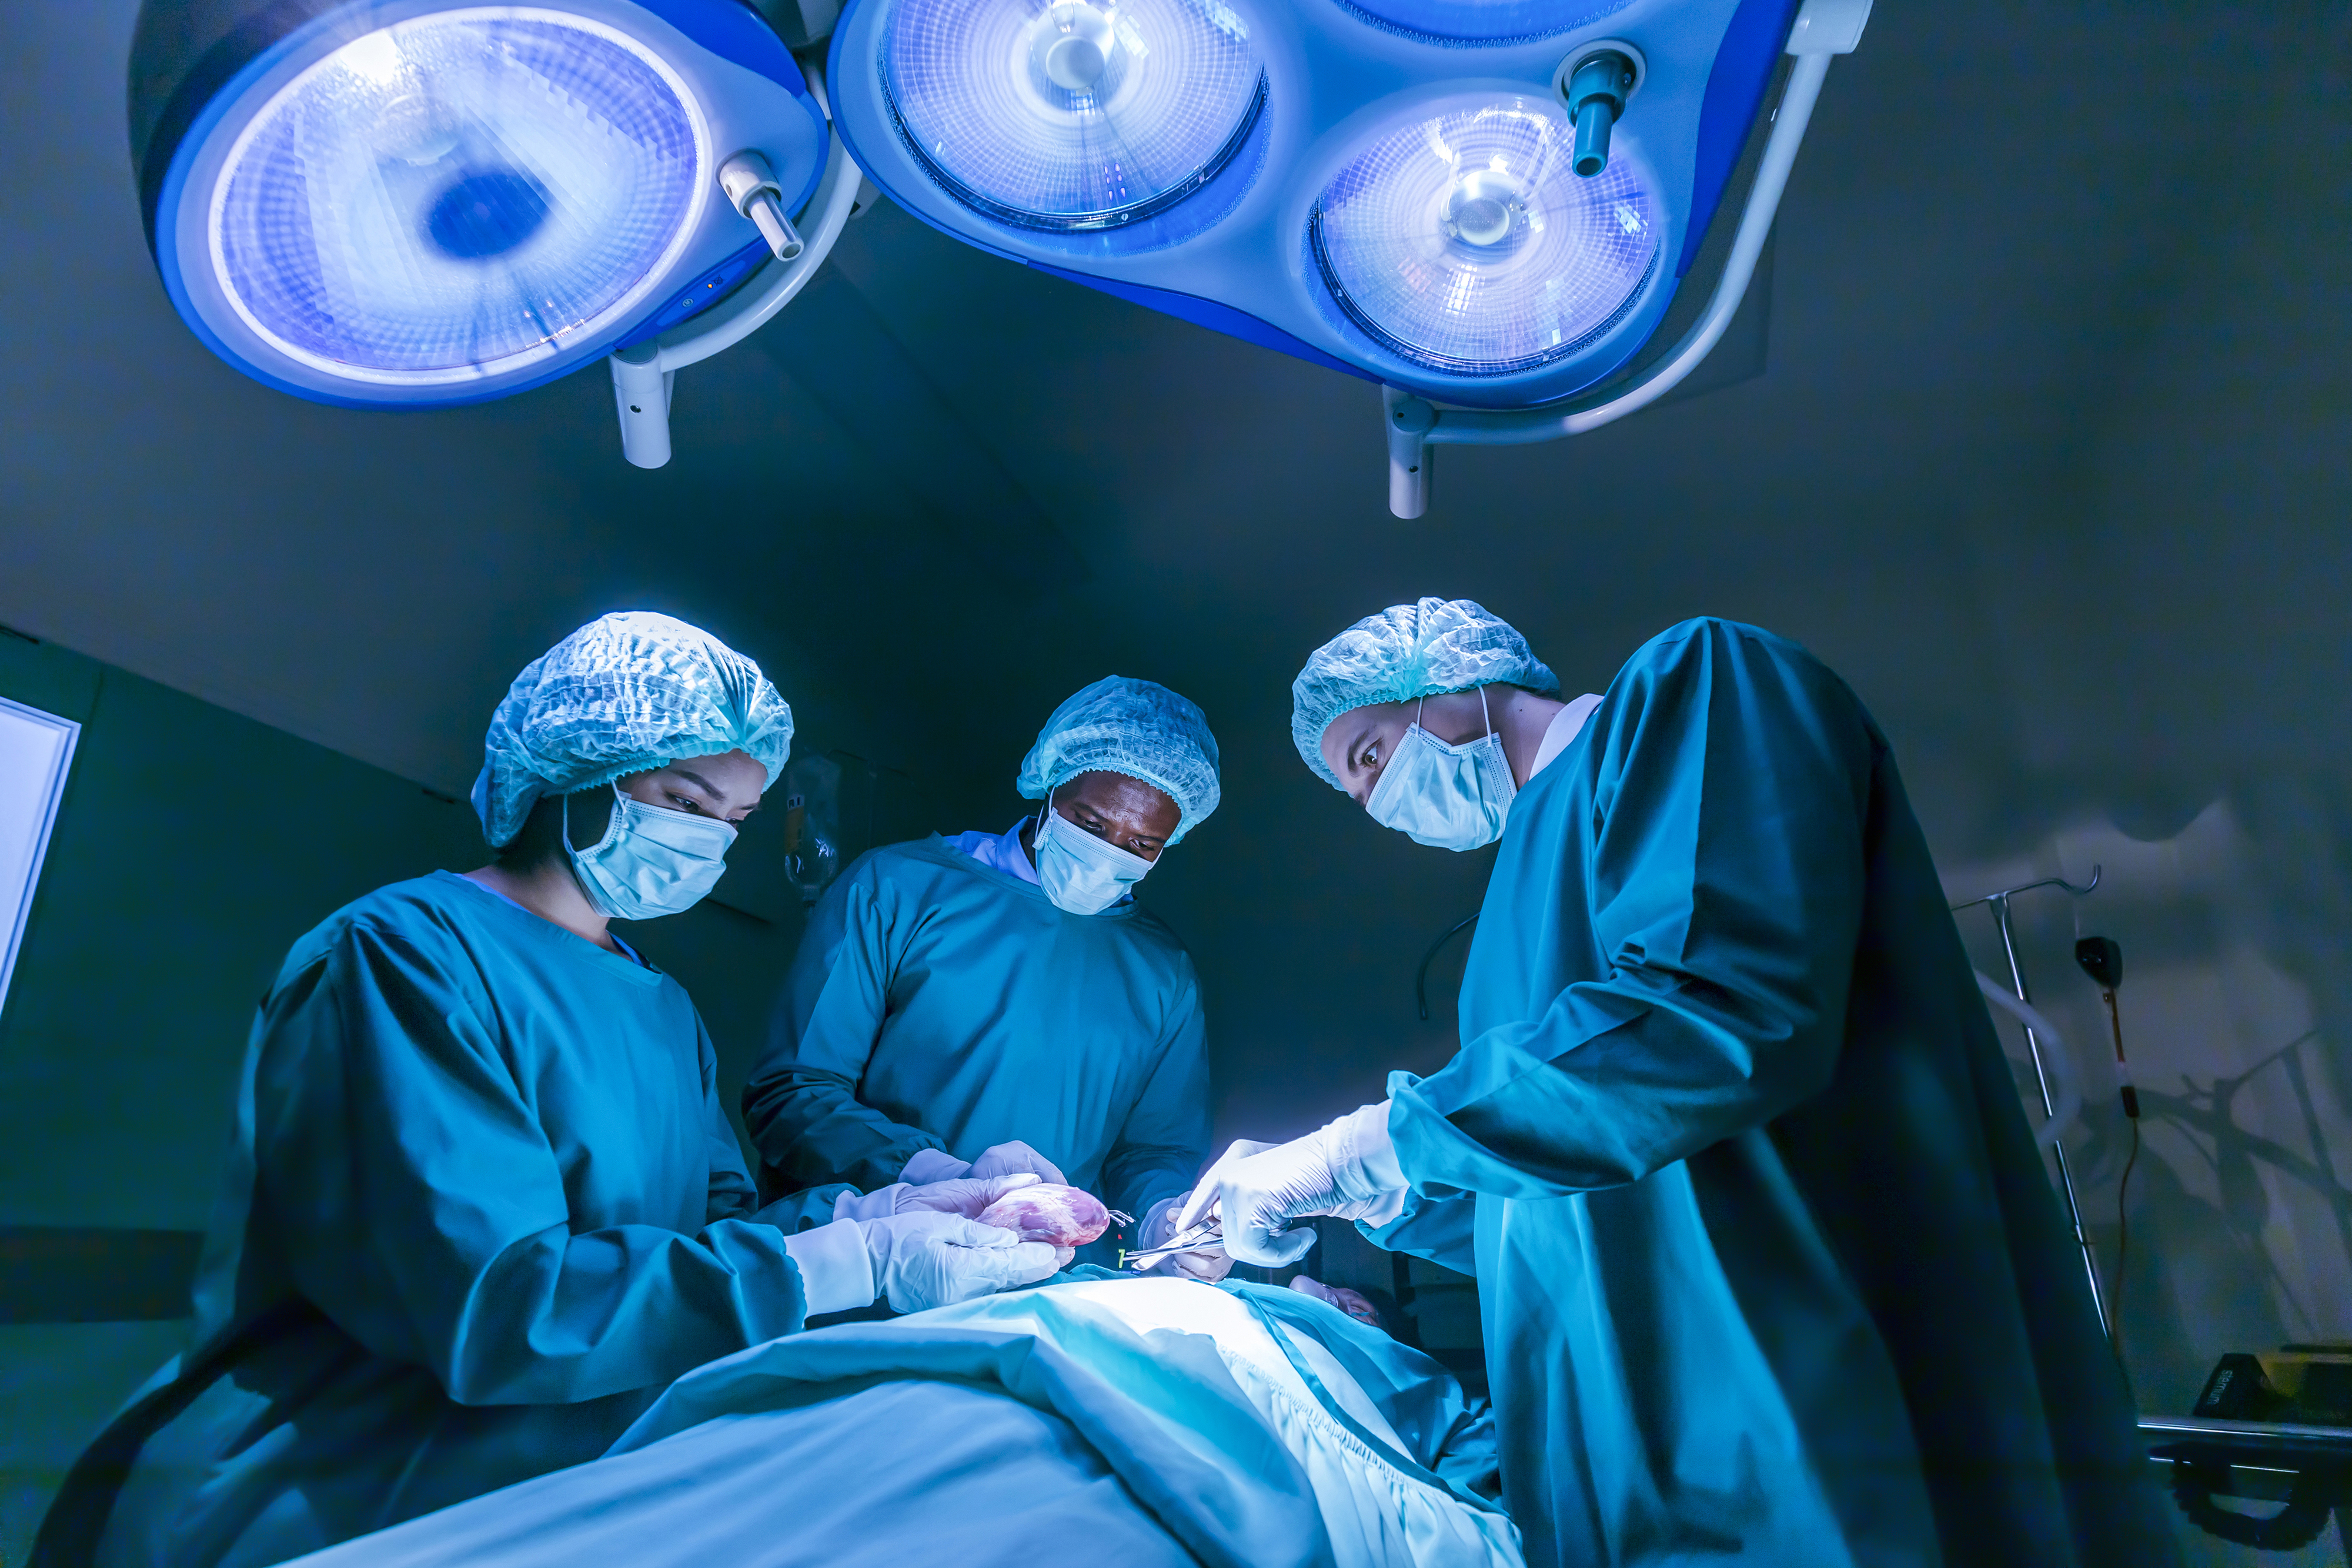 Surgeons in an operating room performing surgery under bright surgical lights, wearing scrubs, caps, and masks